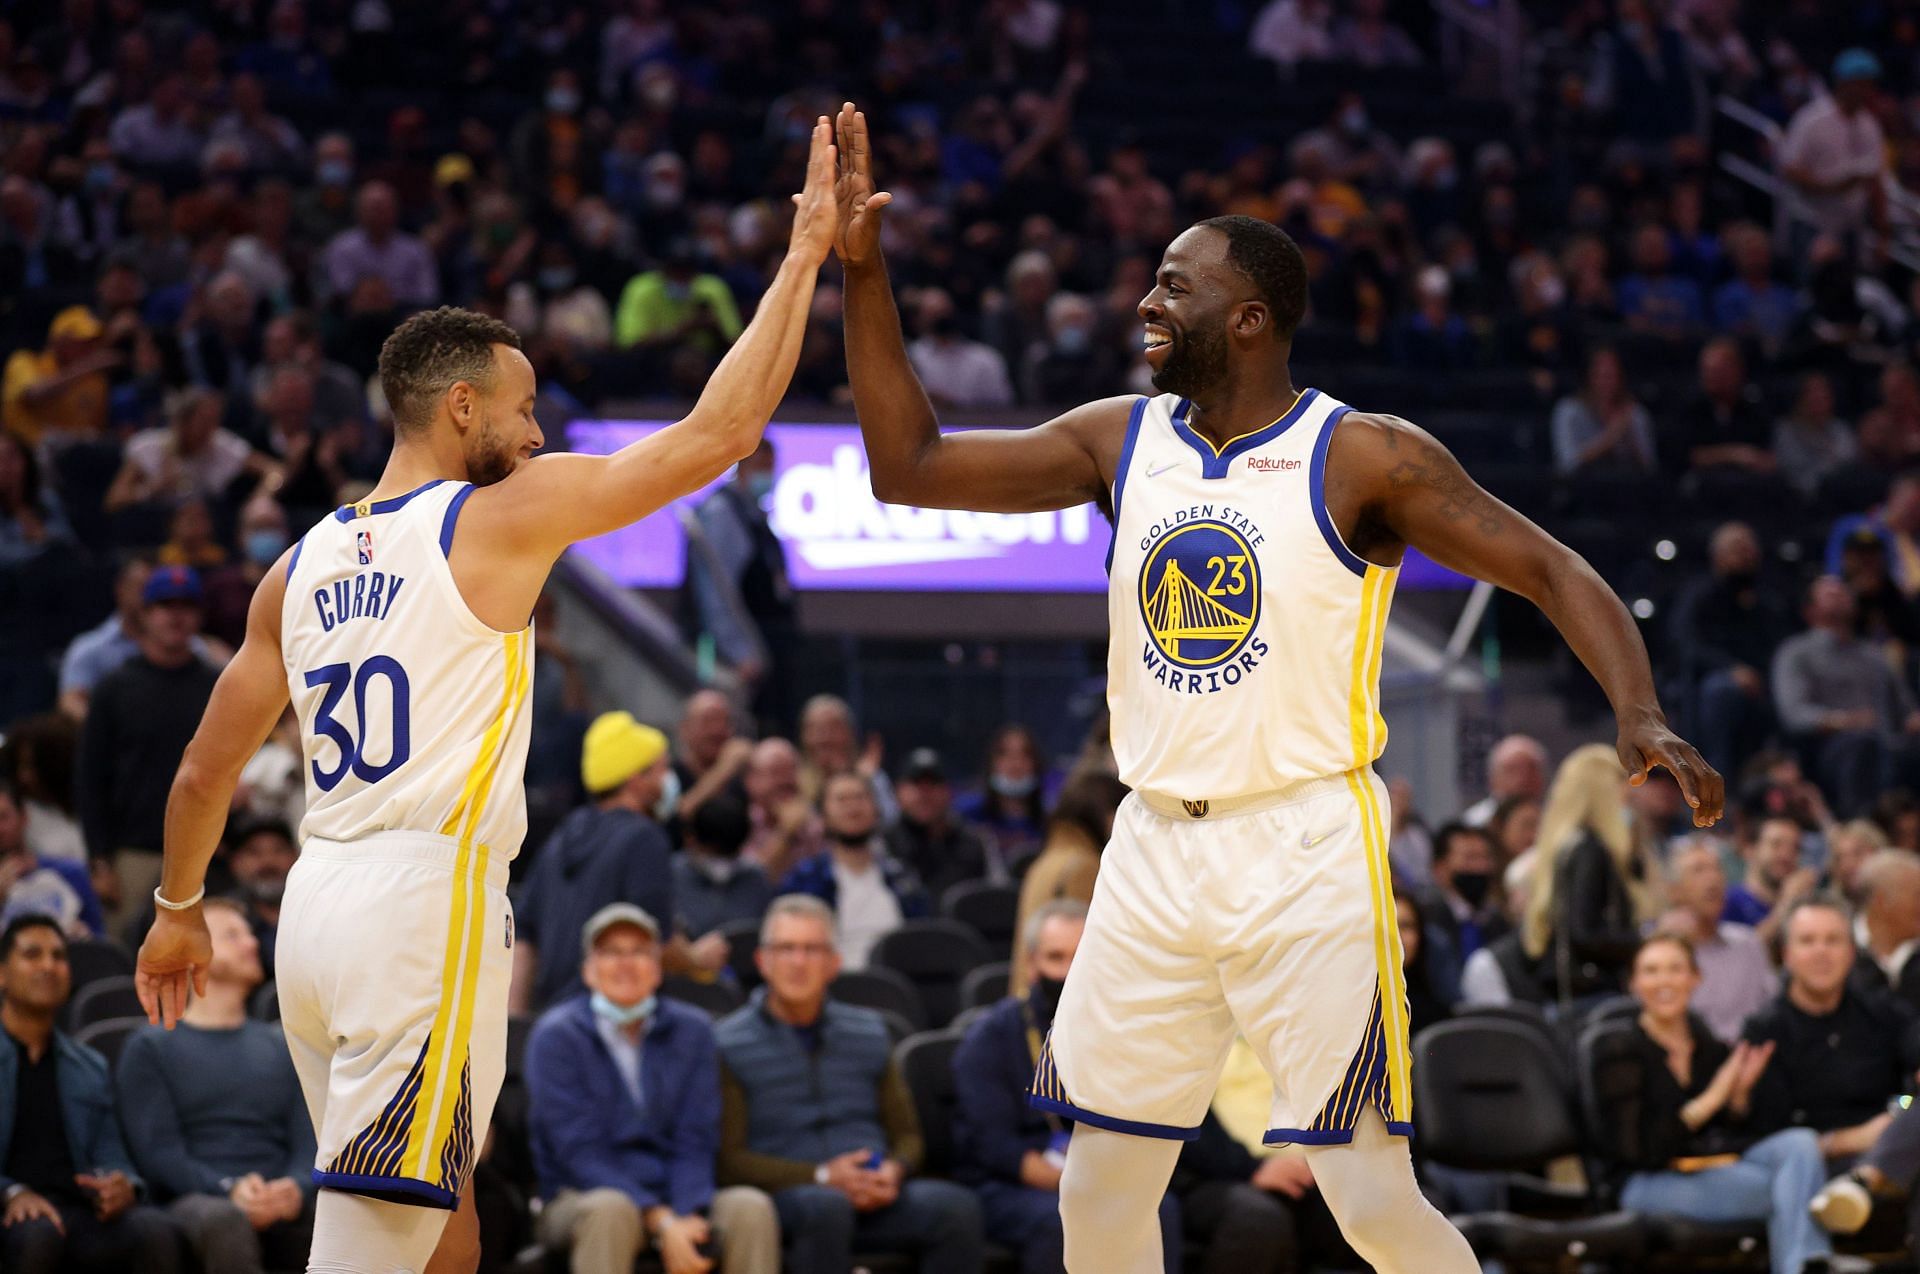 Draymond Green of the Golden State Warriors high-fives Stephen Curry (30) during the first half against the Memphis Grizzlies at Chase Center on Oct. 28, 2021, in San Francisco, Calif.